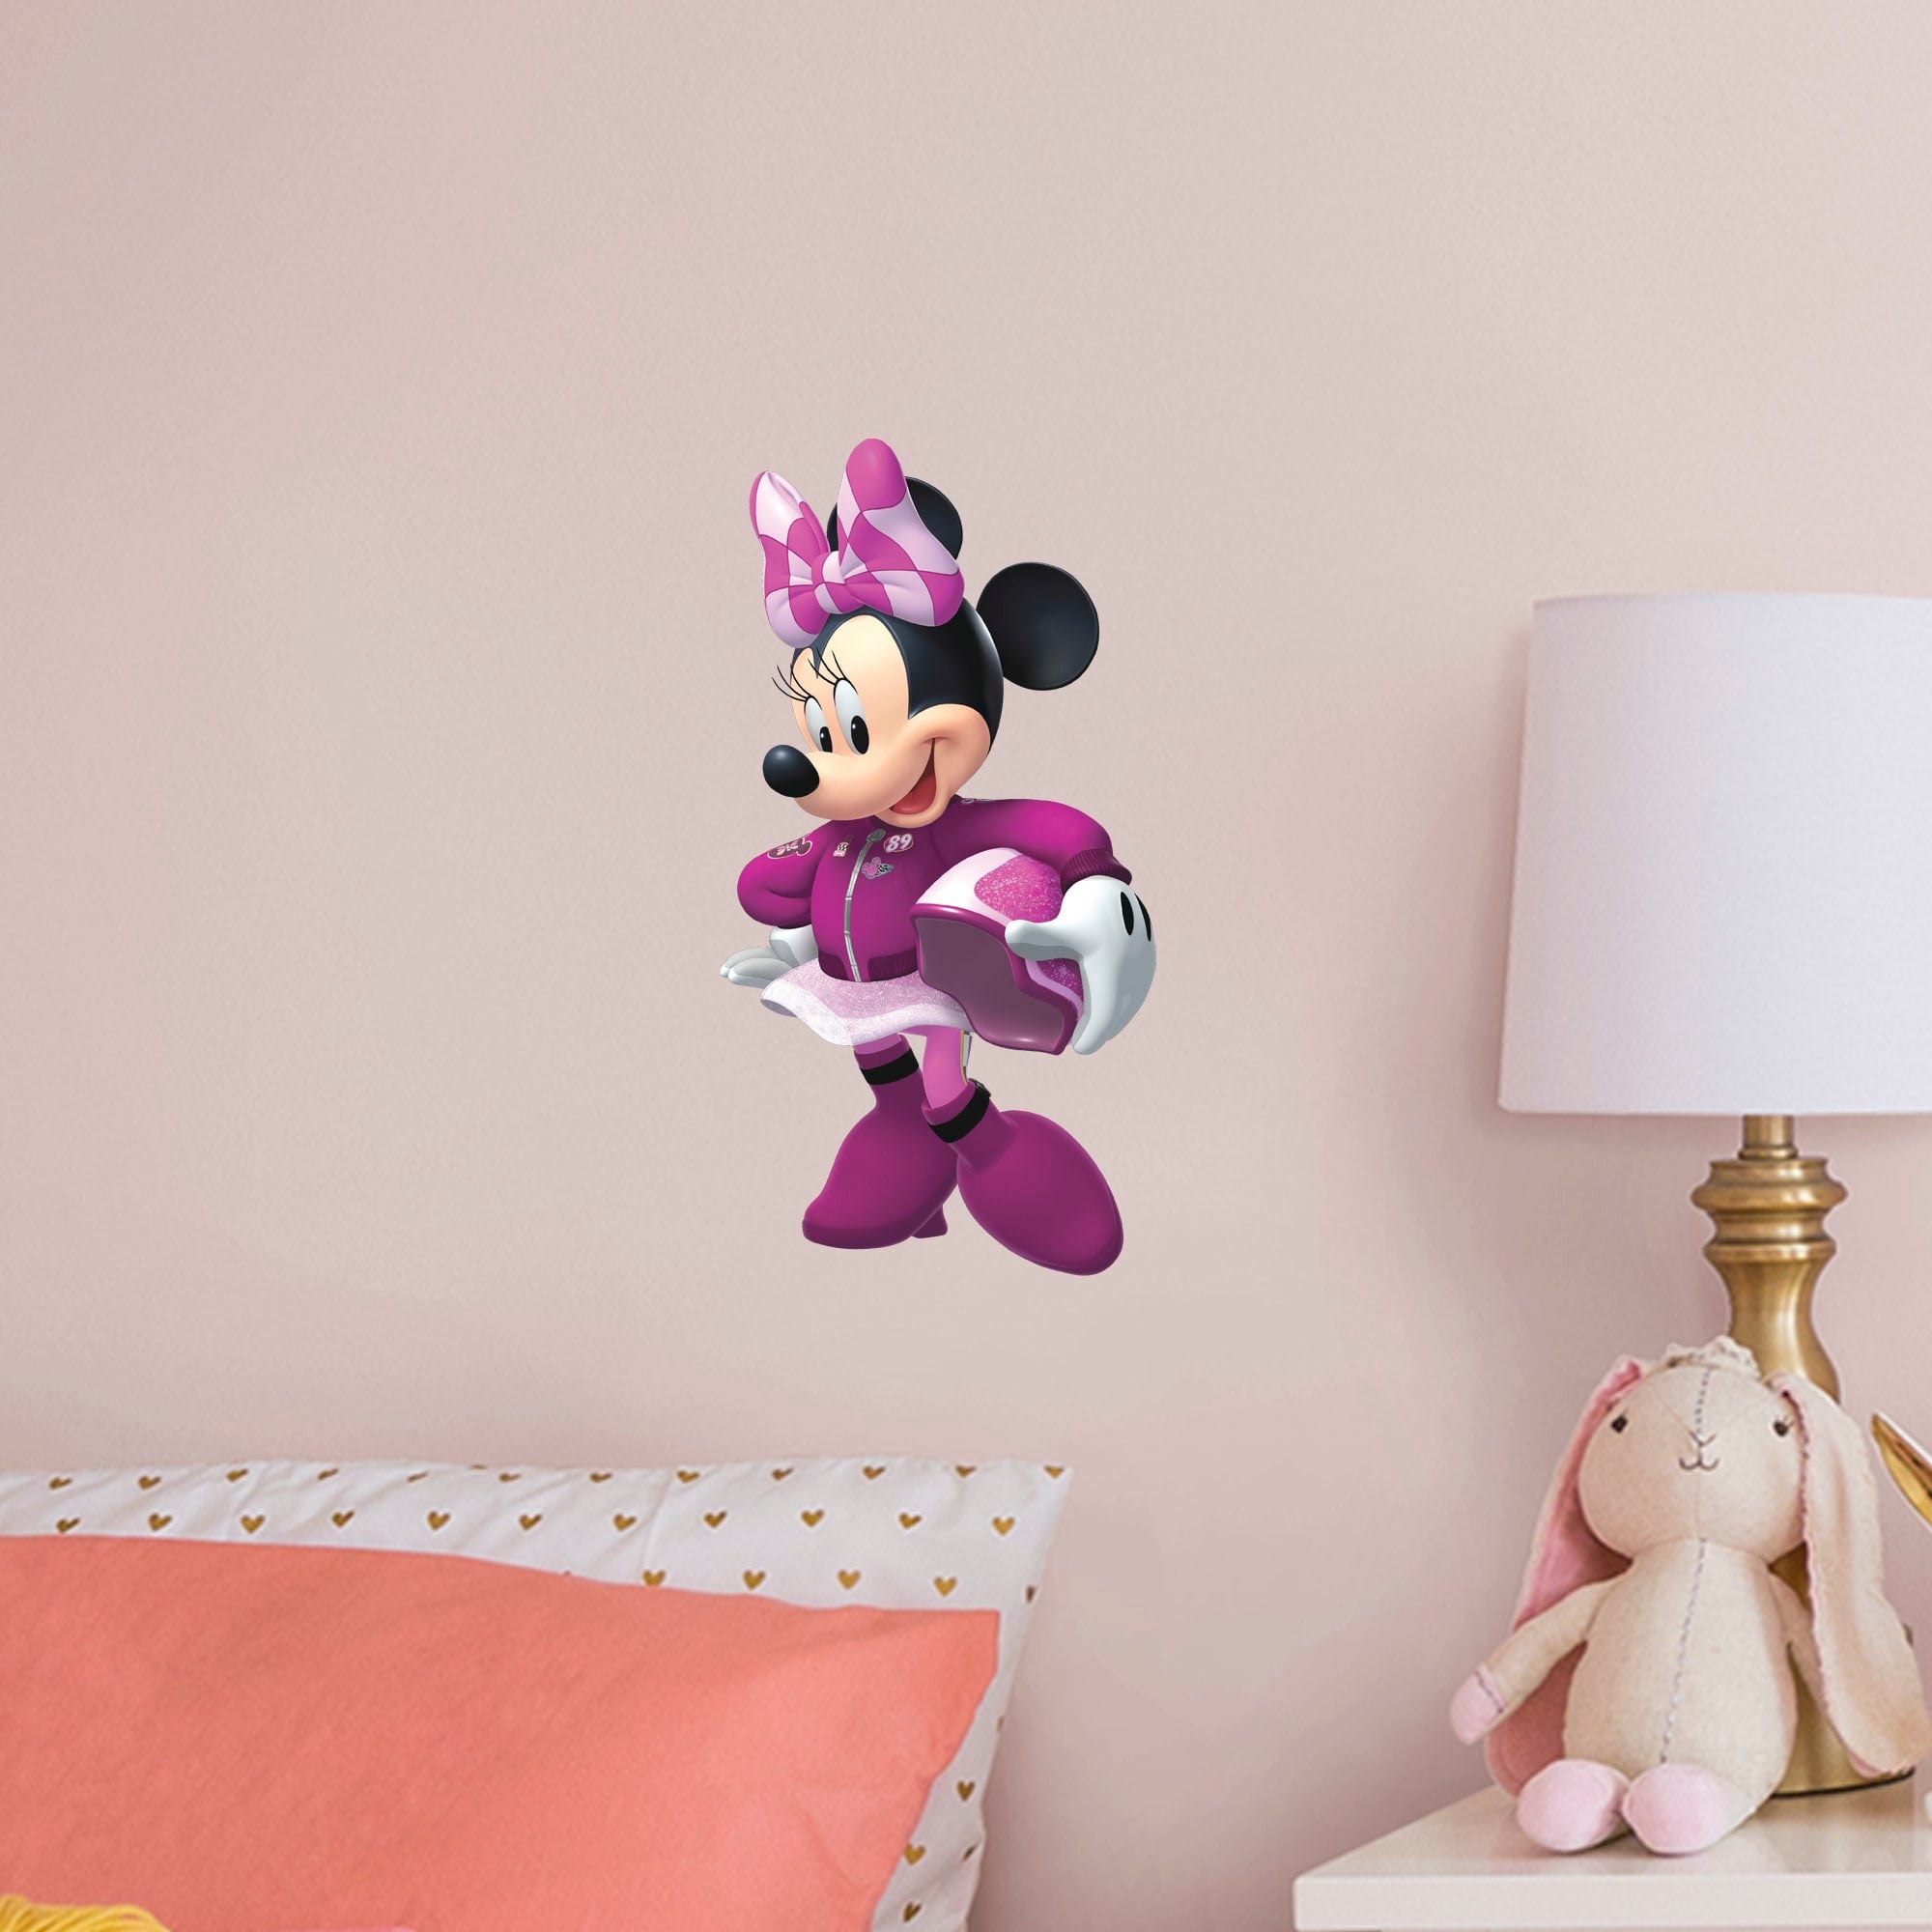 Mickey and the Roadster Racers: Minnie Mouse - Officially Licensed Disney Removable Wall Decal Large by Fathead | Vinyl